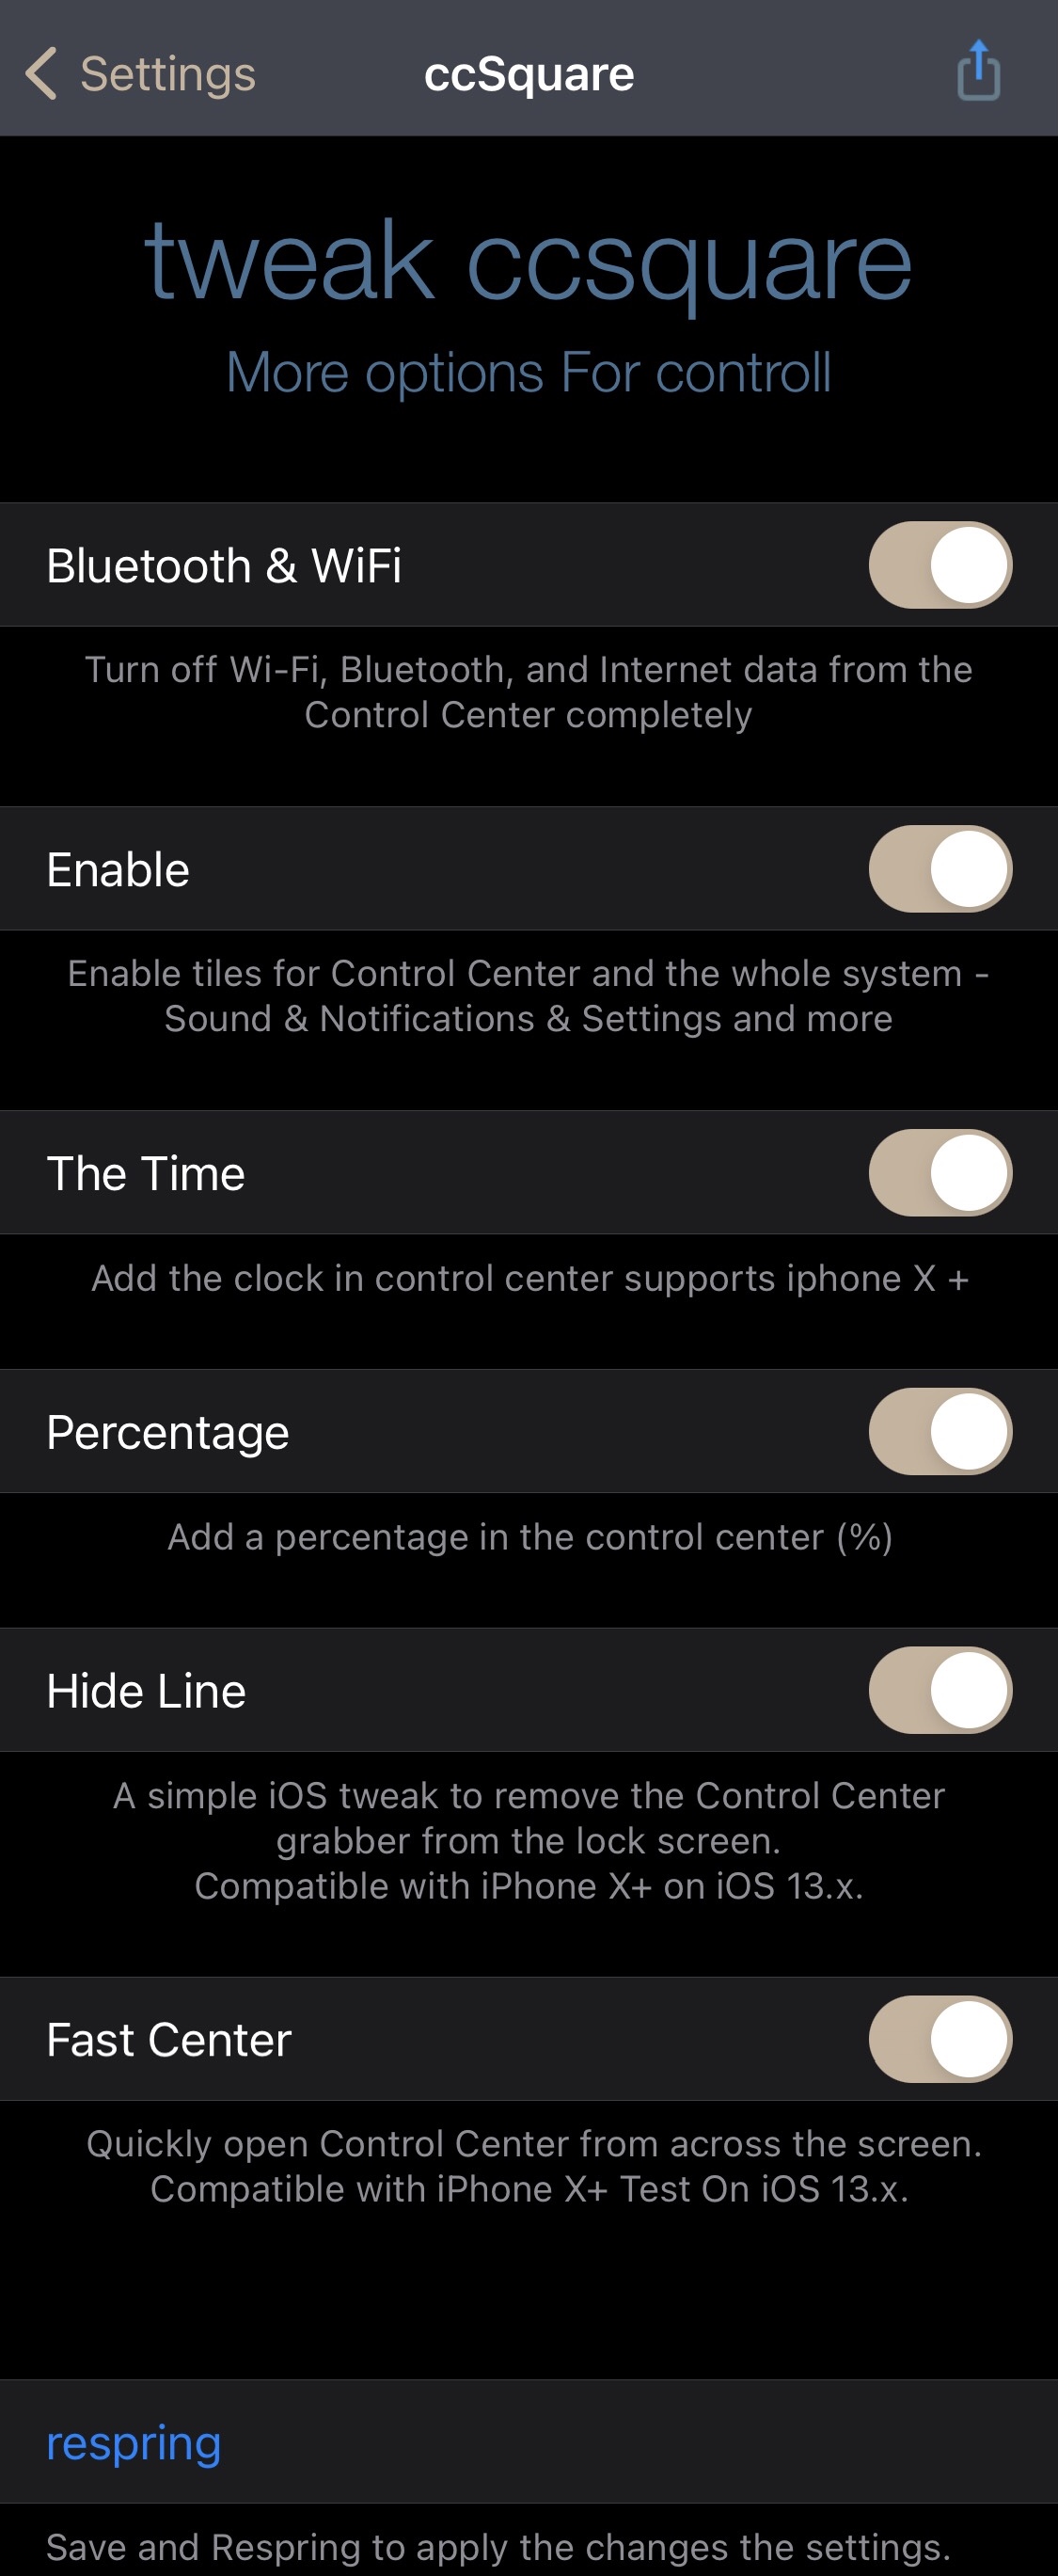 Options you can configure for ccsquare.